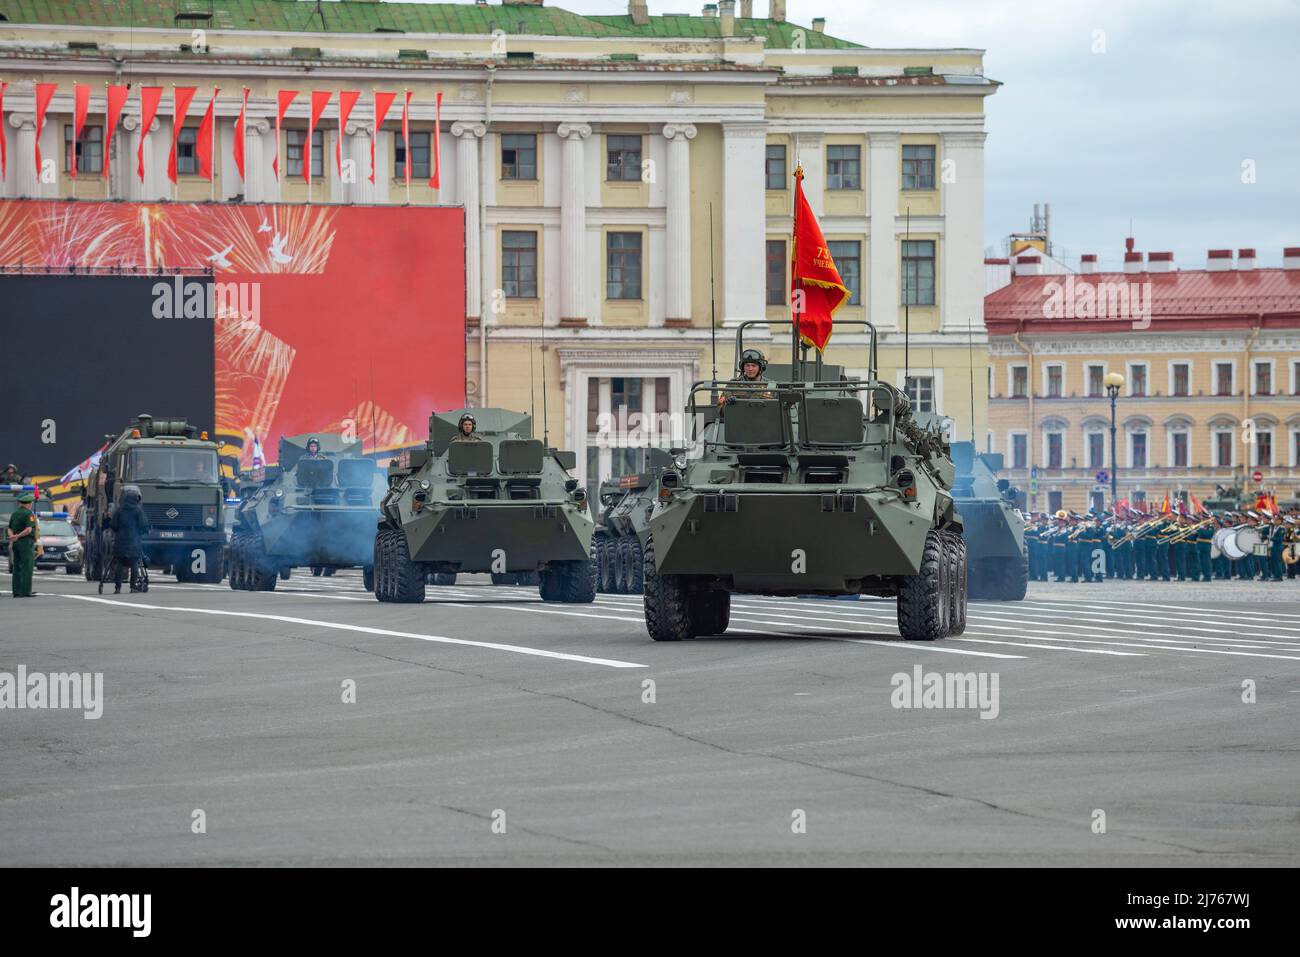 SAINT PETERSBURG, RUSSIA - JUNE 20, 2020: A fragment of the military parade in honor of Victory Day. Saint Petersburg Stock Photo